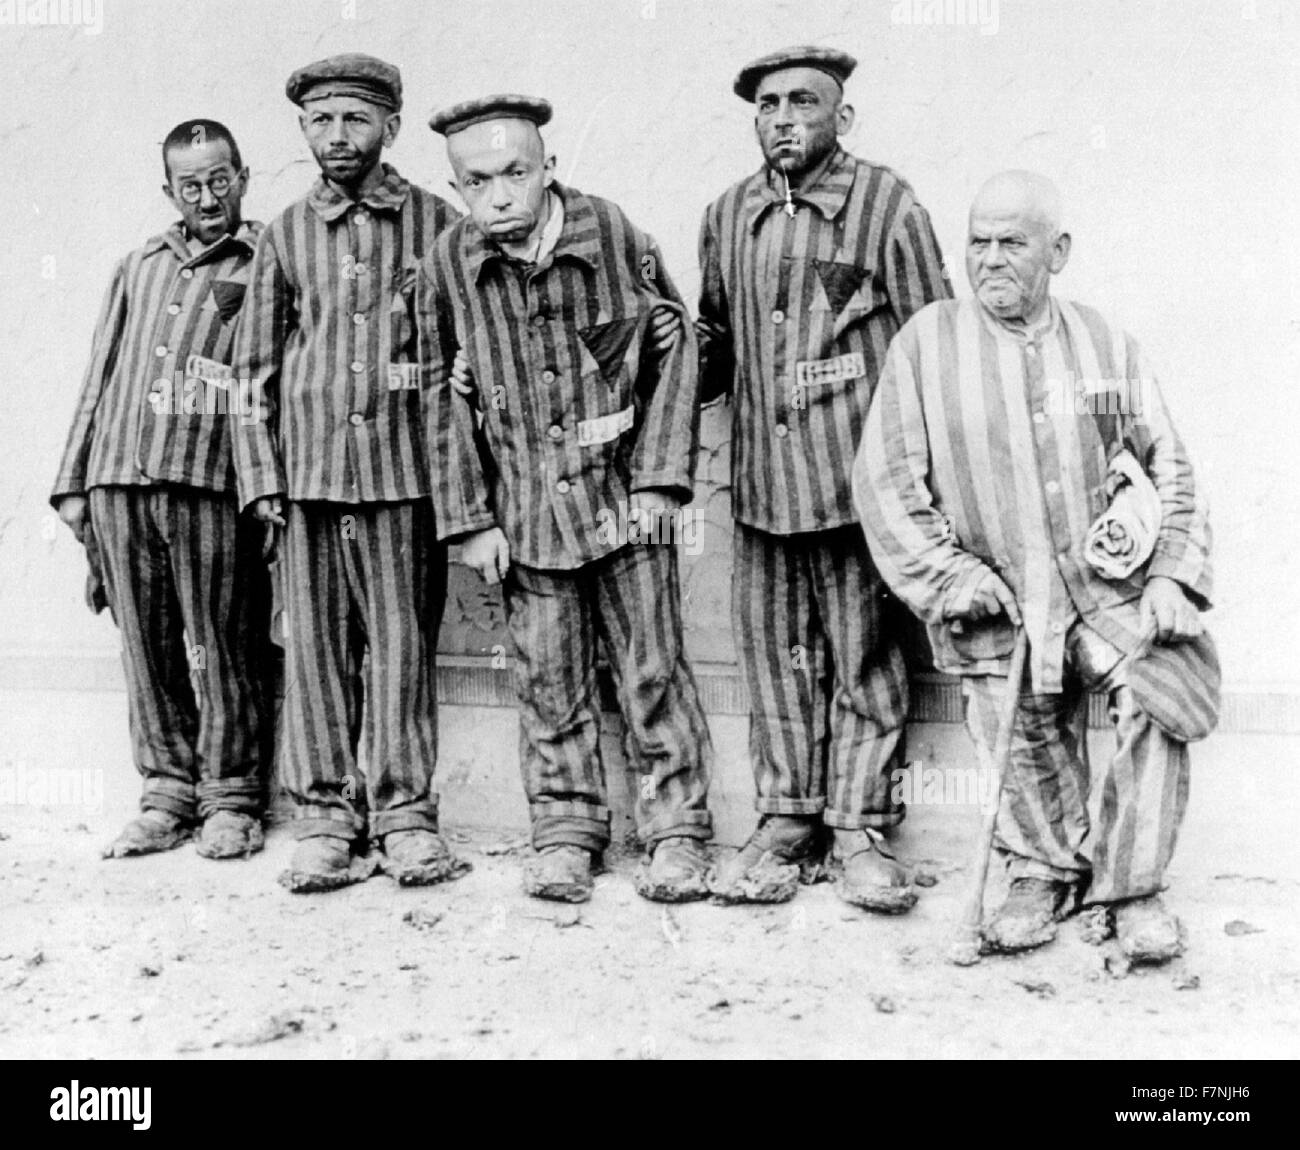 mentally and physically handicapped Jewish prisoners, in Buchenwald concentration camp 1938 Stock Photo